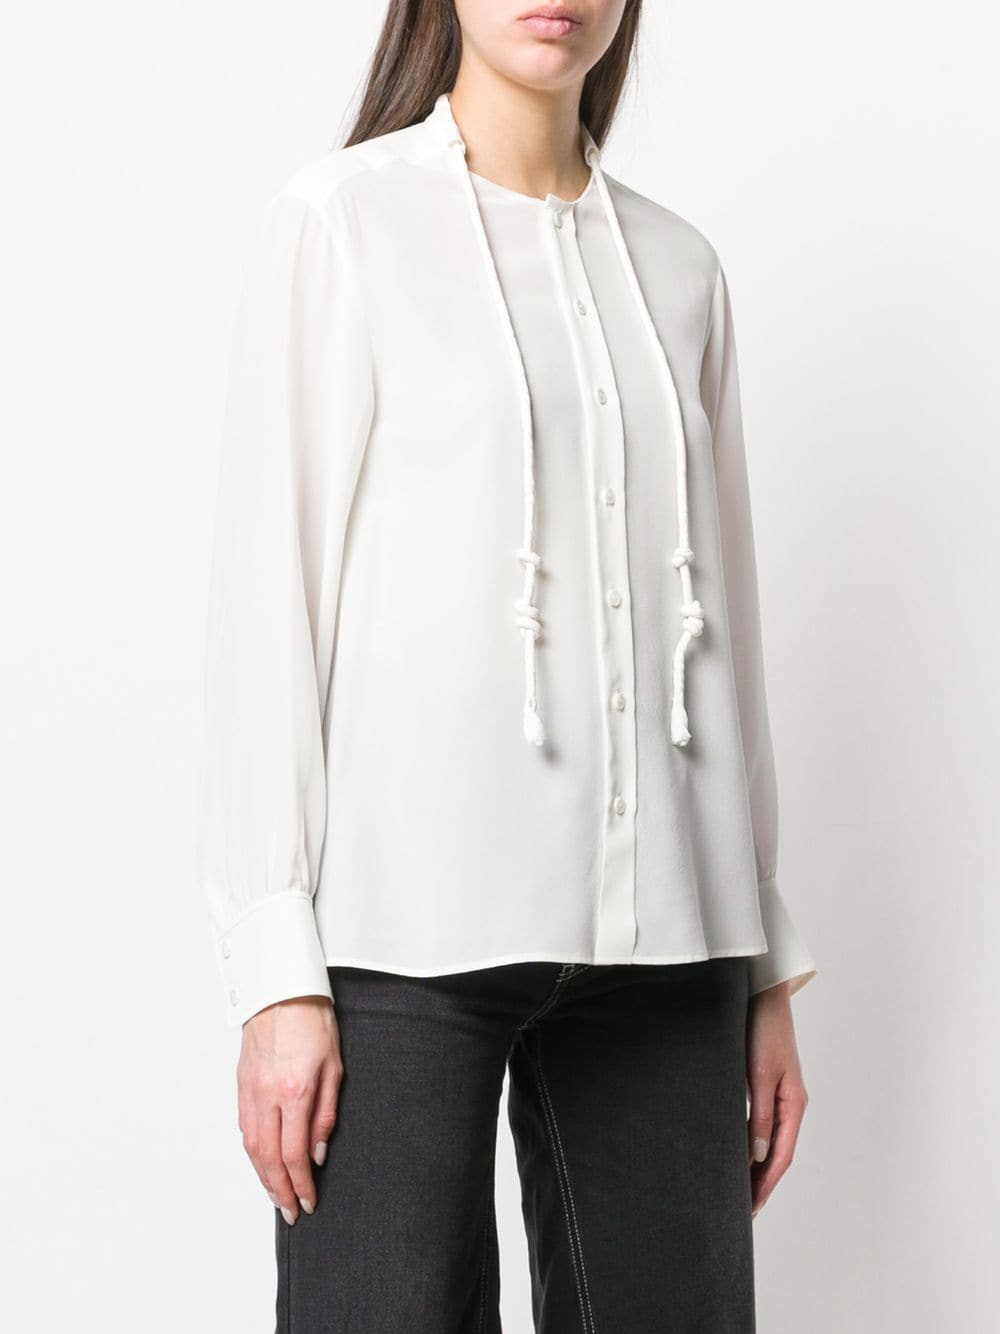 CHLOÉ Elegant Lace Blouse in Iconic Milk for SS19